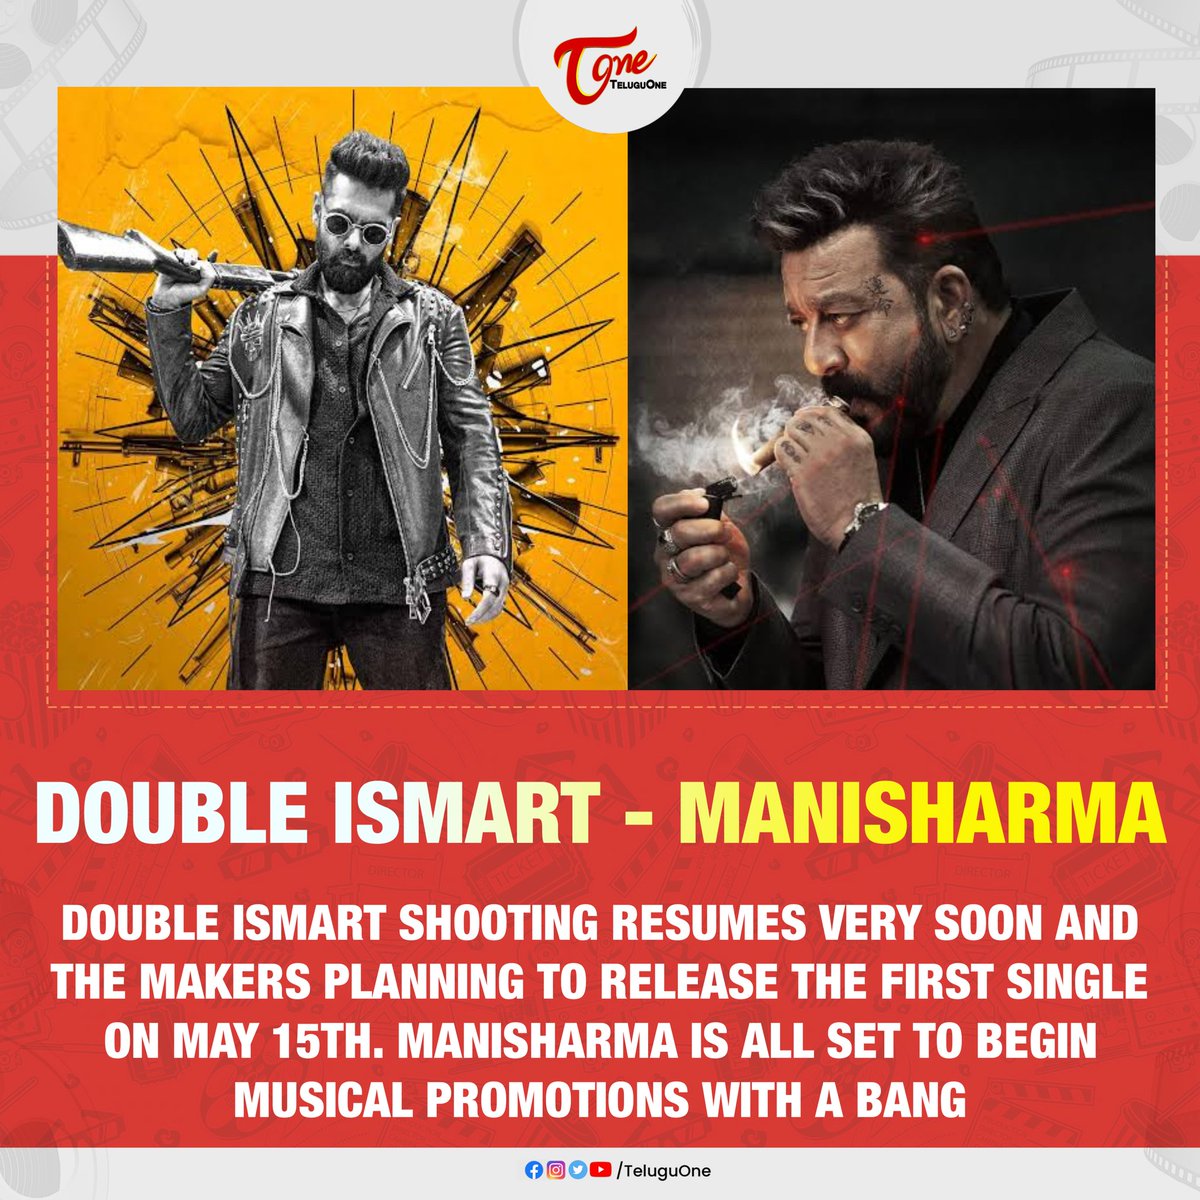 #DoubleIsmart shooting resumes very soon and the makers planning to release the first single on May 15th. #Manisharma is all set to begin musical promotions with a bang.

#RAmPOthineni #PuriJagannath